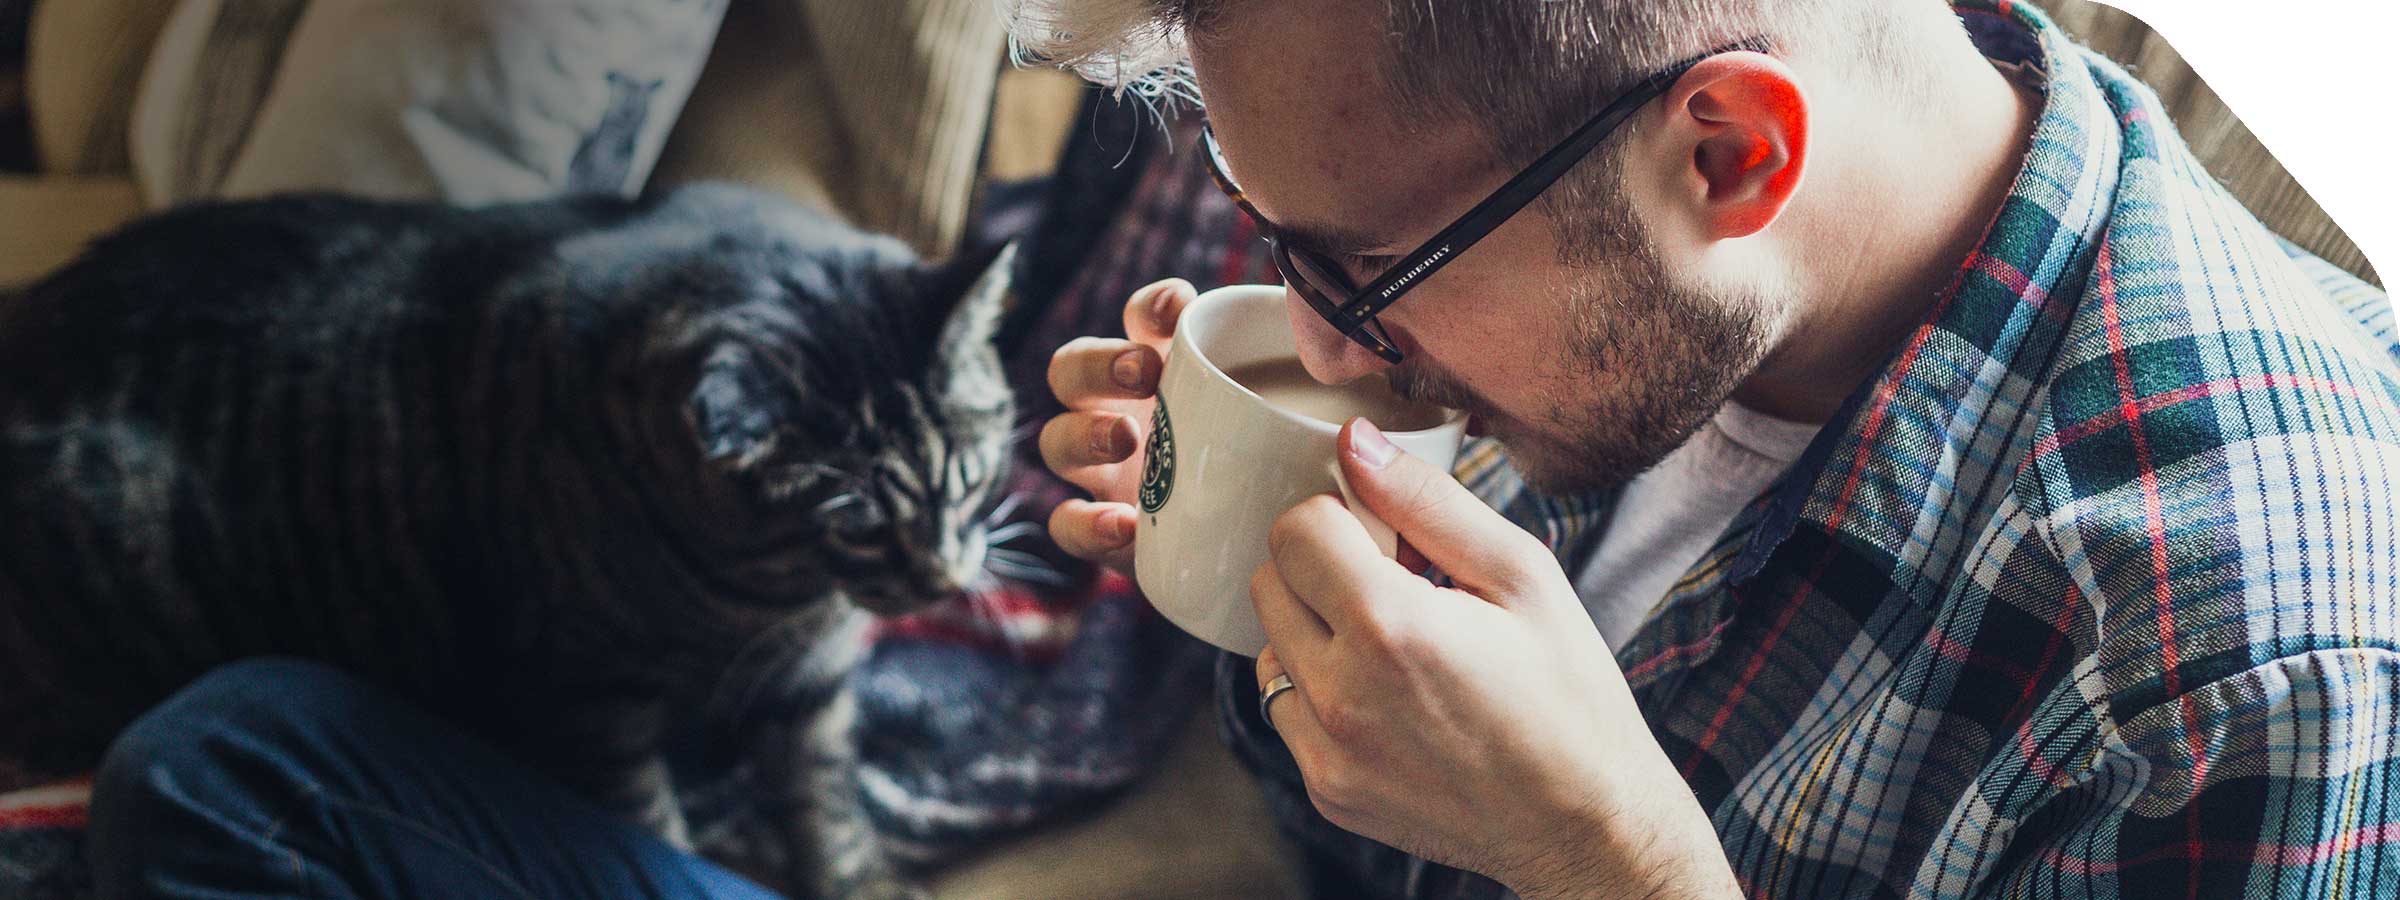 Image of cat with man drinking coffee